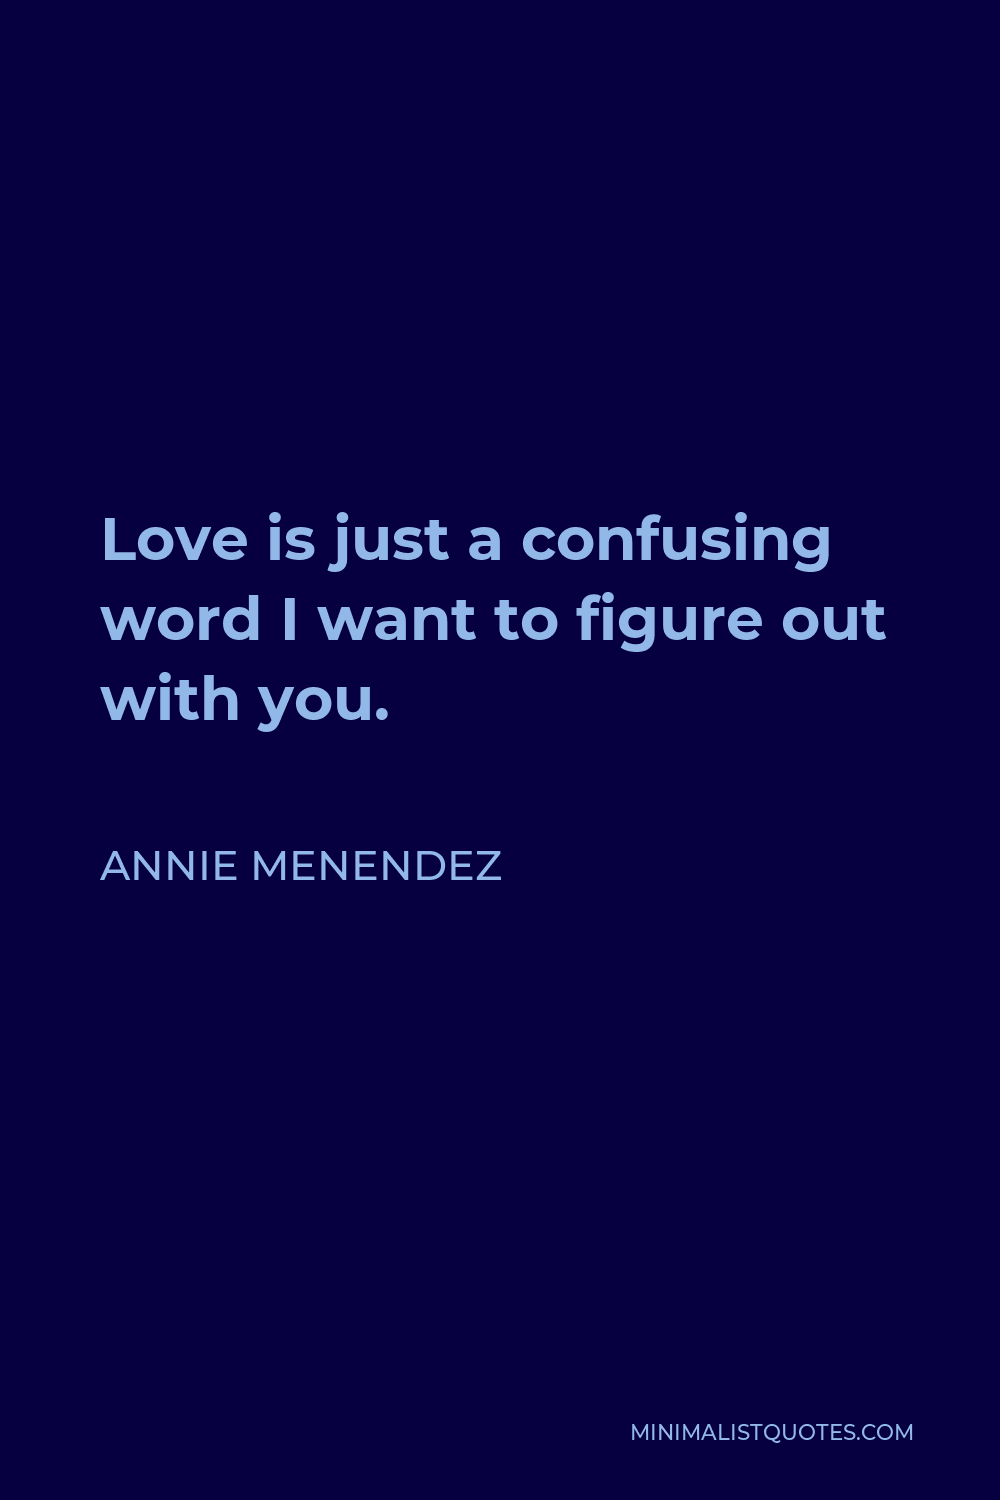 Annie Menendez Quote - Love is just a confusing word I want to figure out with you.